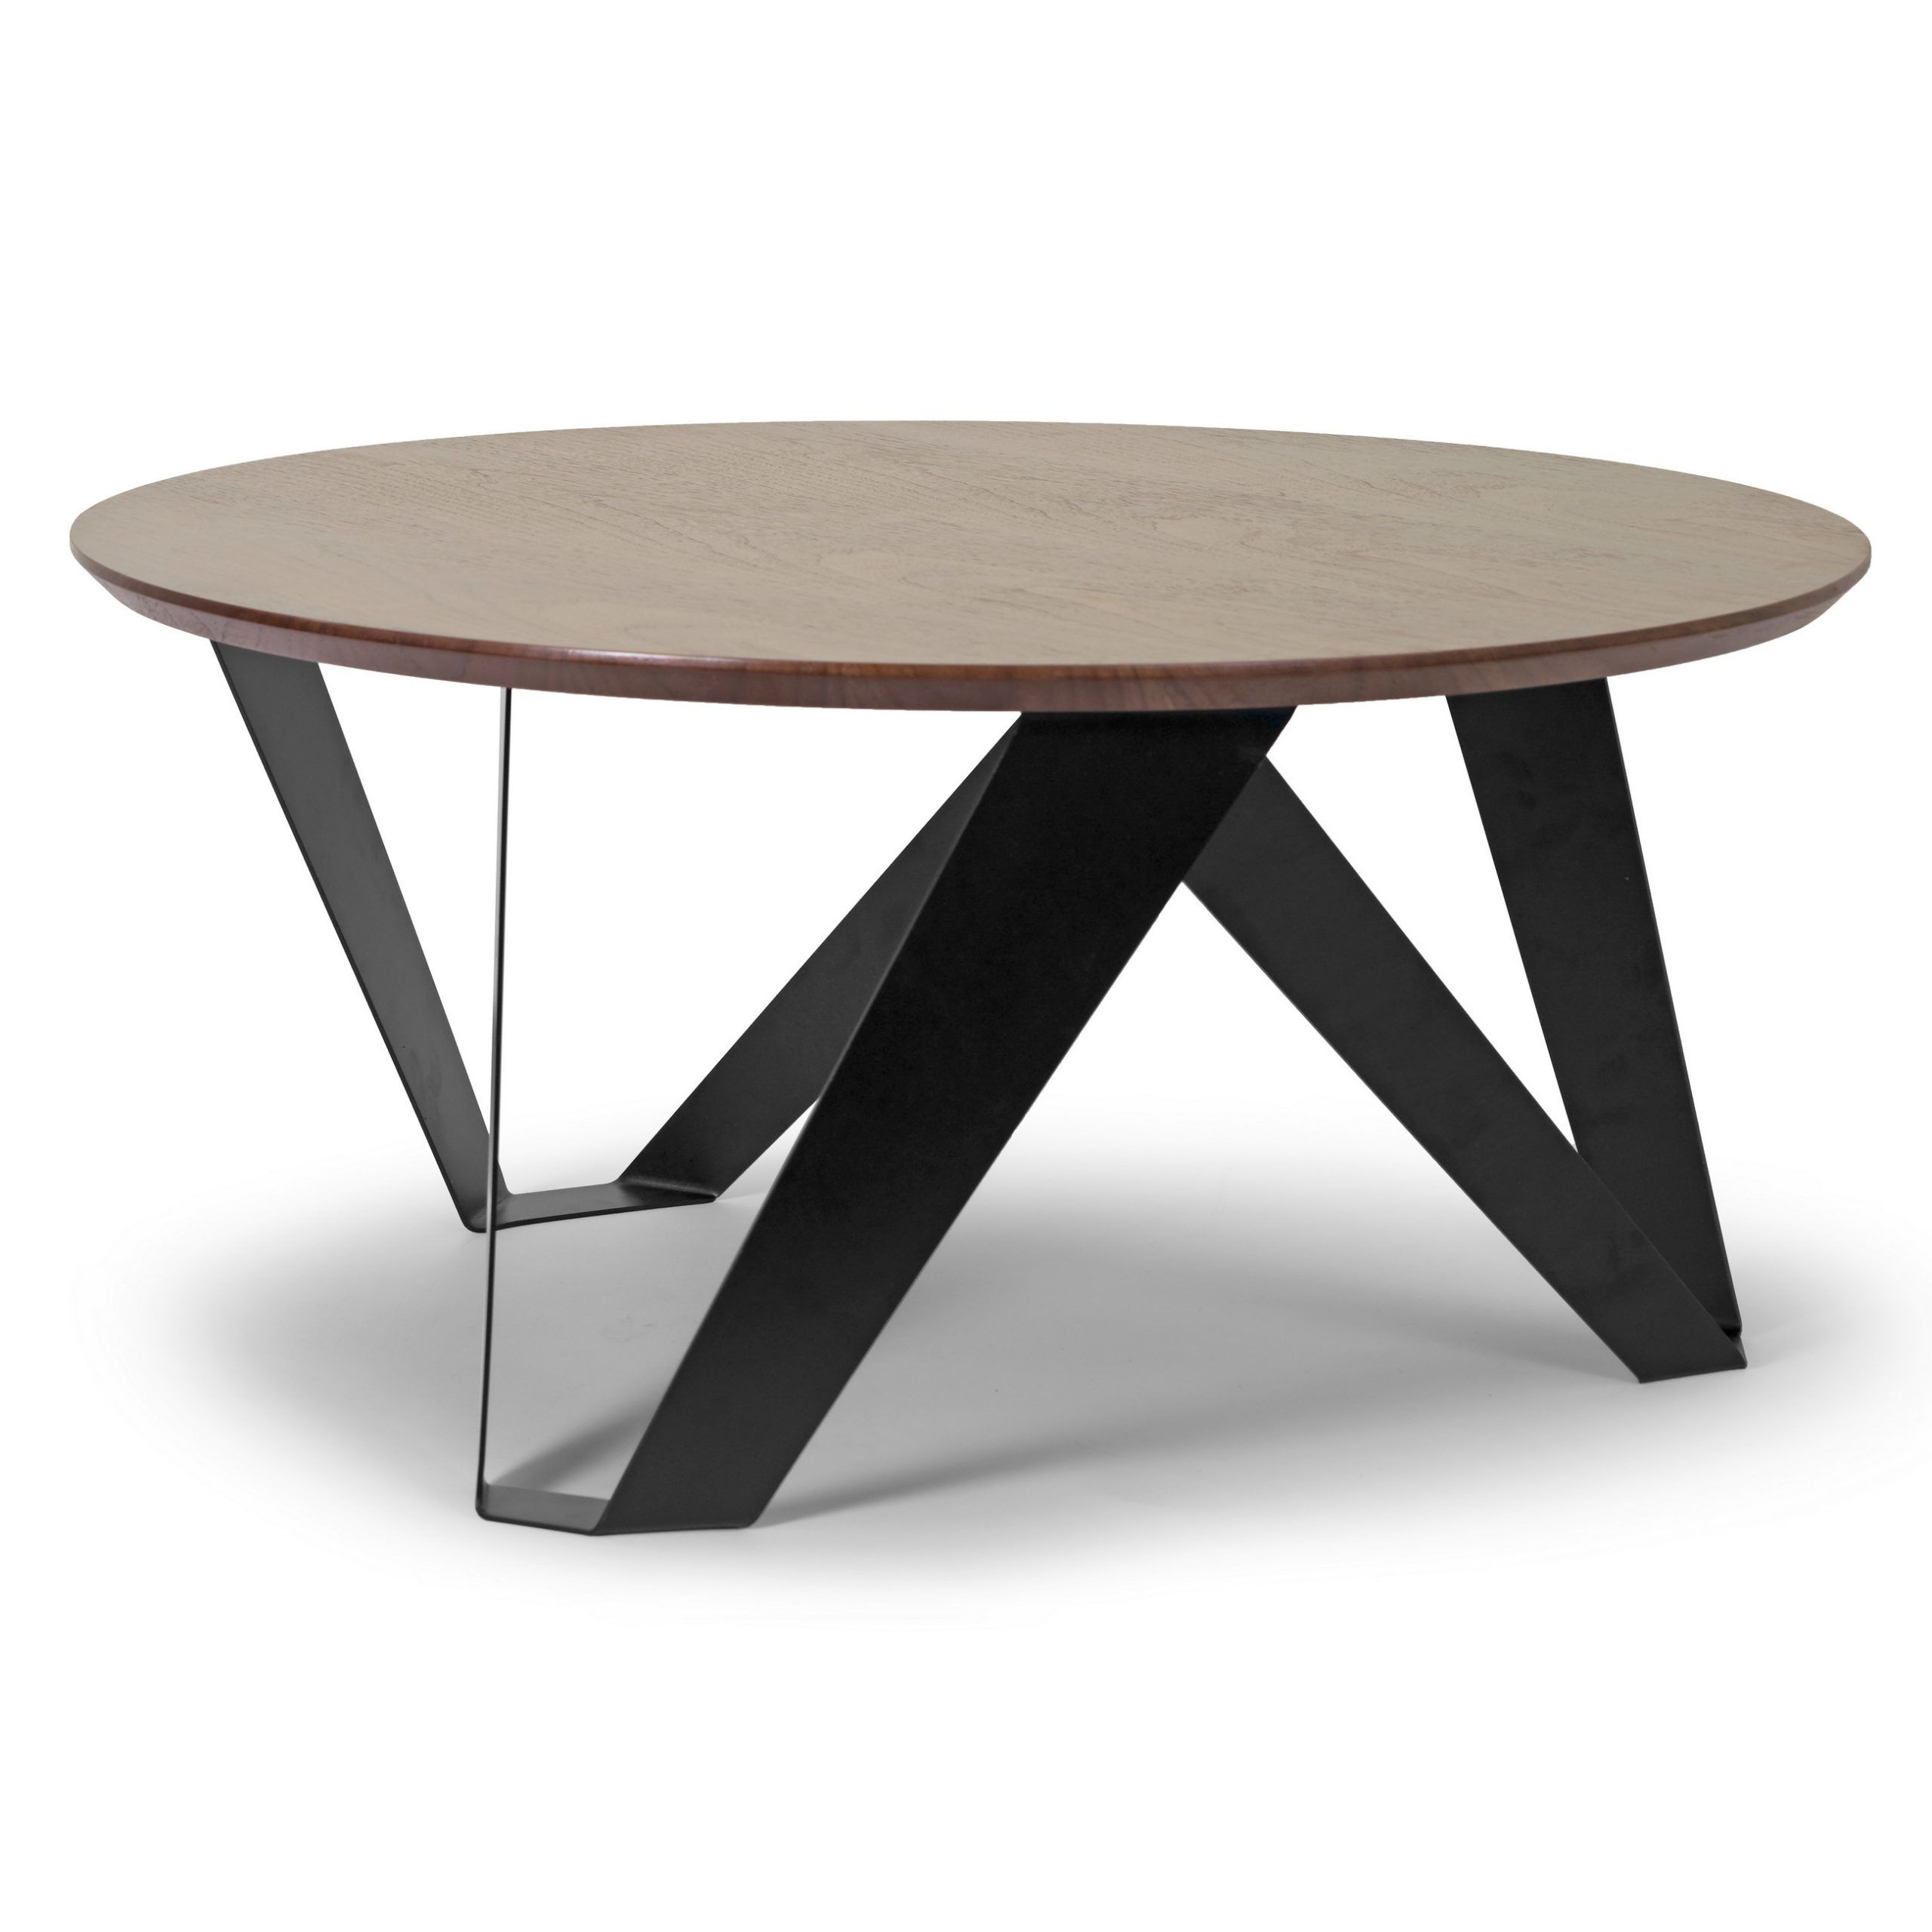 Fashionable Aimi Walnut Finish Round Modern Coffee Table With Black Metal Legs Intended For Black Coffee Tables (View 8 of 10)